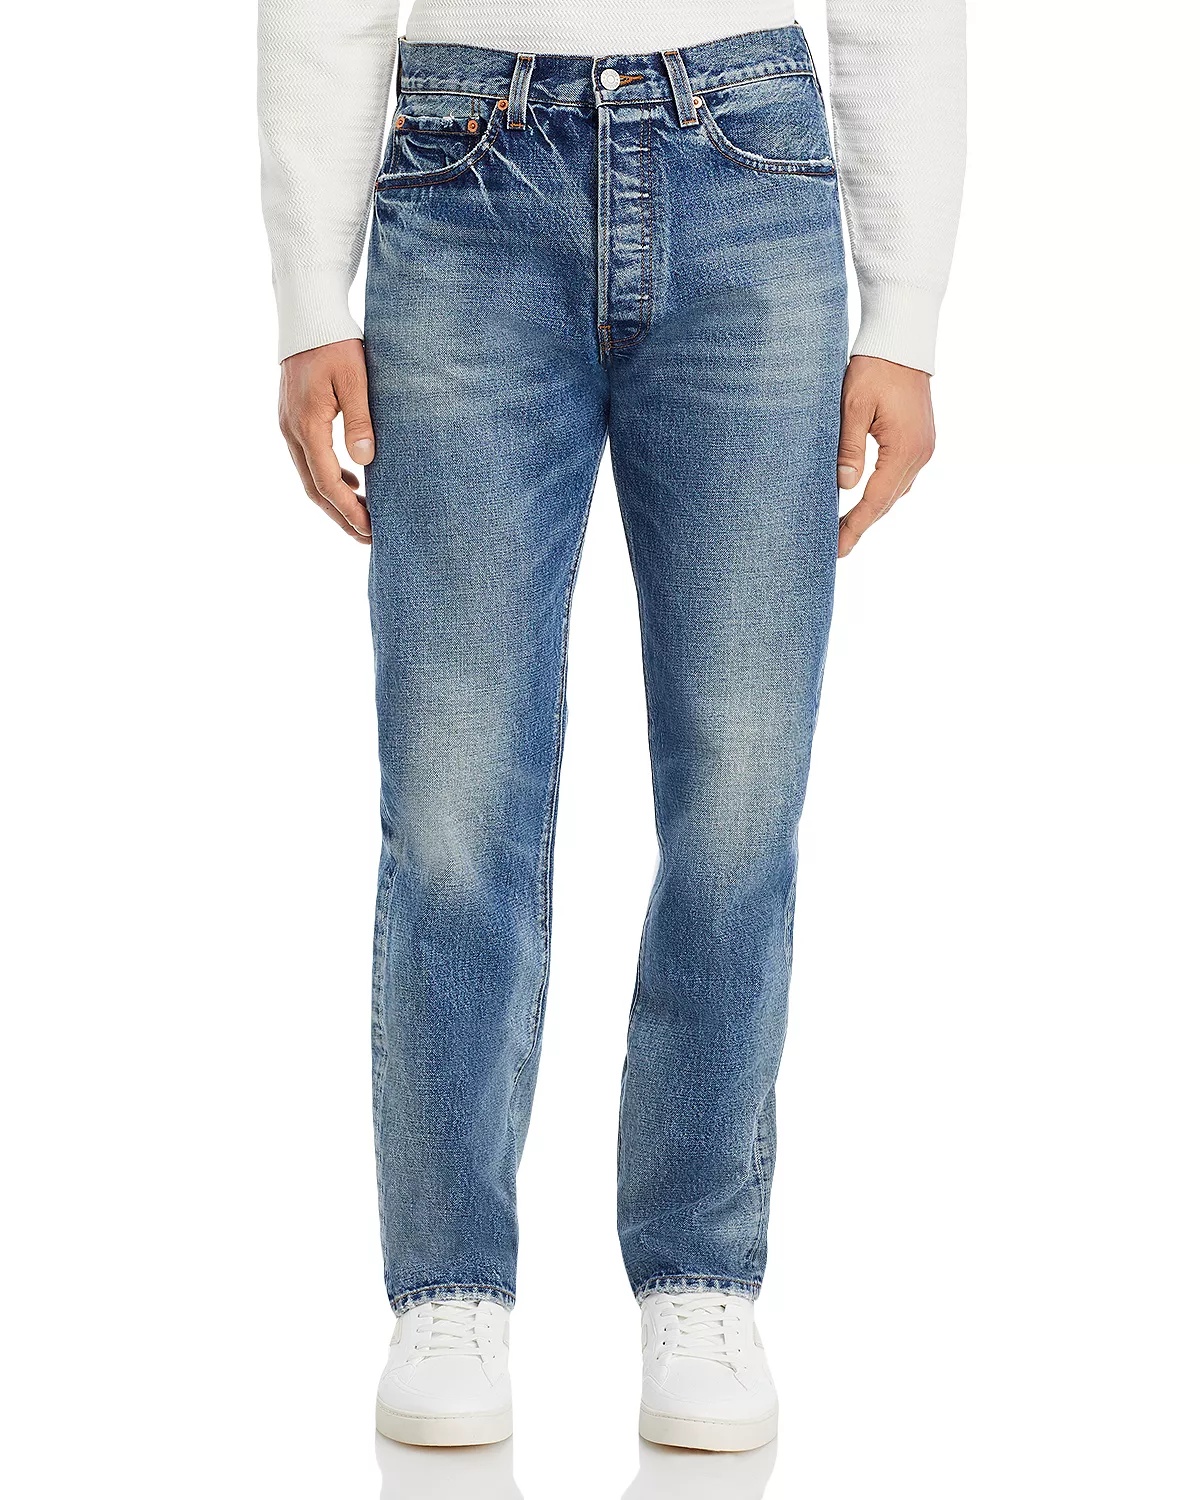 1401 Straight Fit Jeans in Worn In Blue - 3